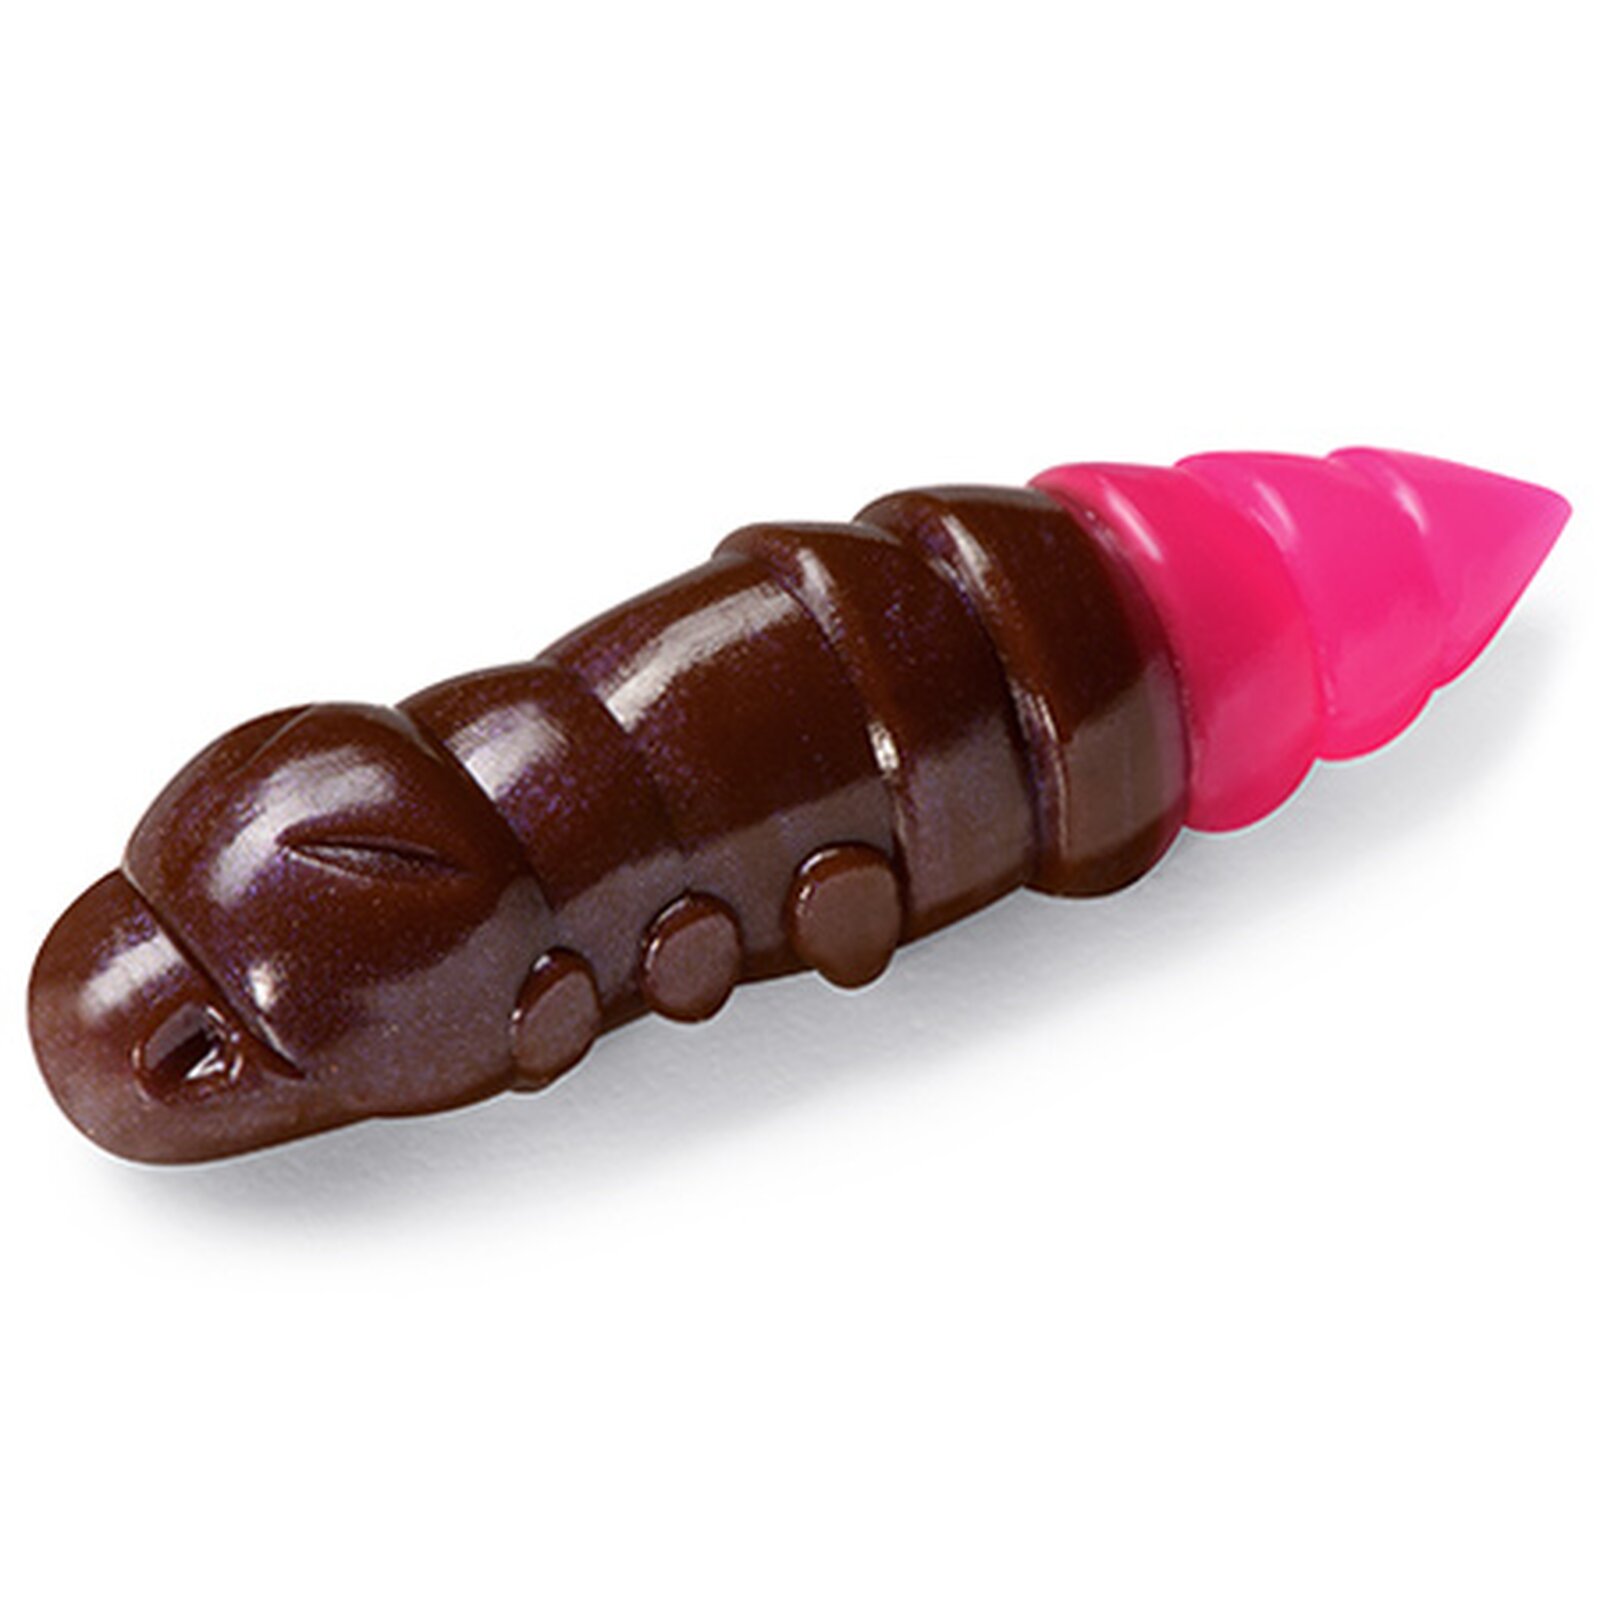 FishUp Pupa #139 - Earthworm/Hot Pink Knoblauch